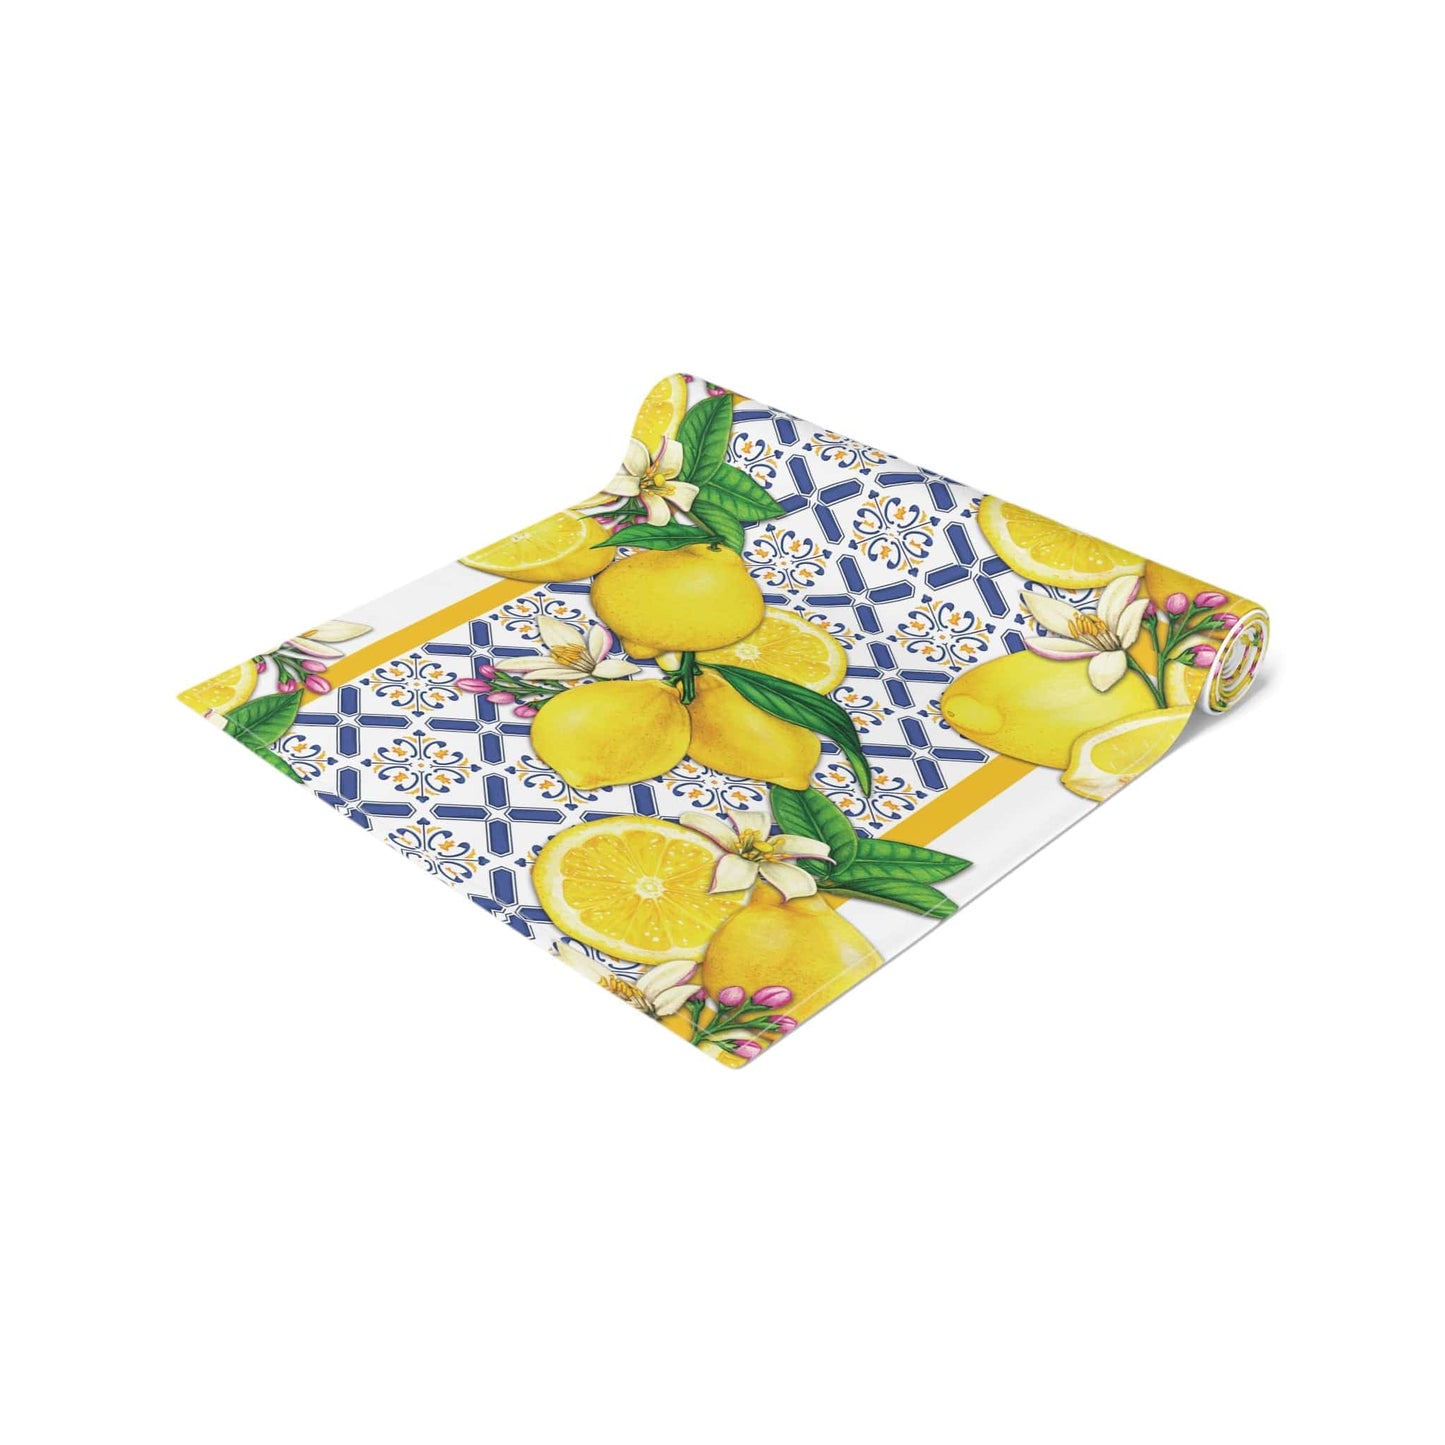 Kate McEnroe New York Cobalt Blue and Yellow Lemon and Tiles Table Runner, Mediterranean Floral Dining Table Centerpiece, Fall Home Decor, Holiday Table Setting Table Runners